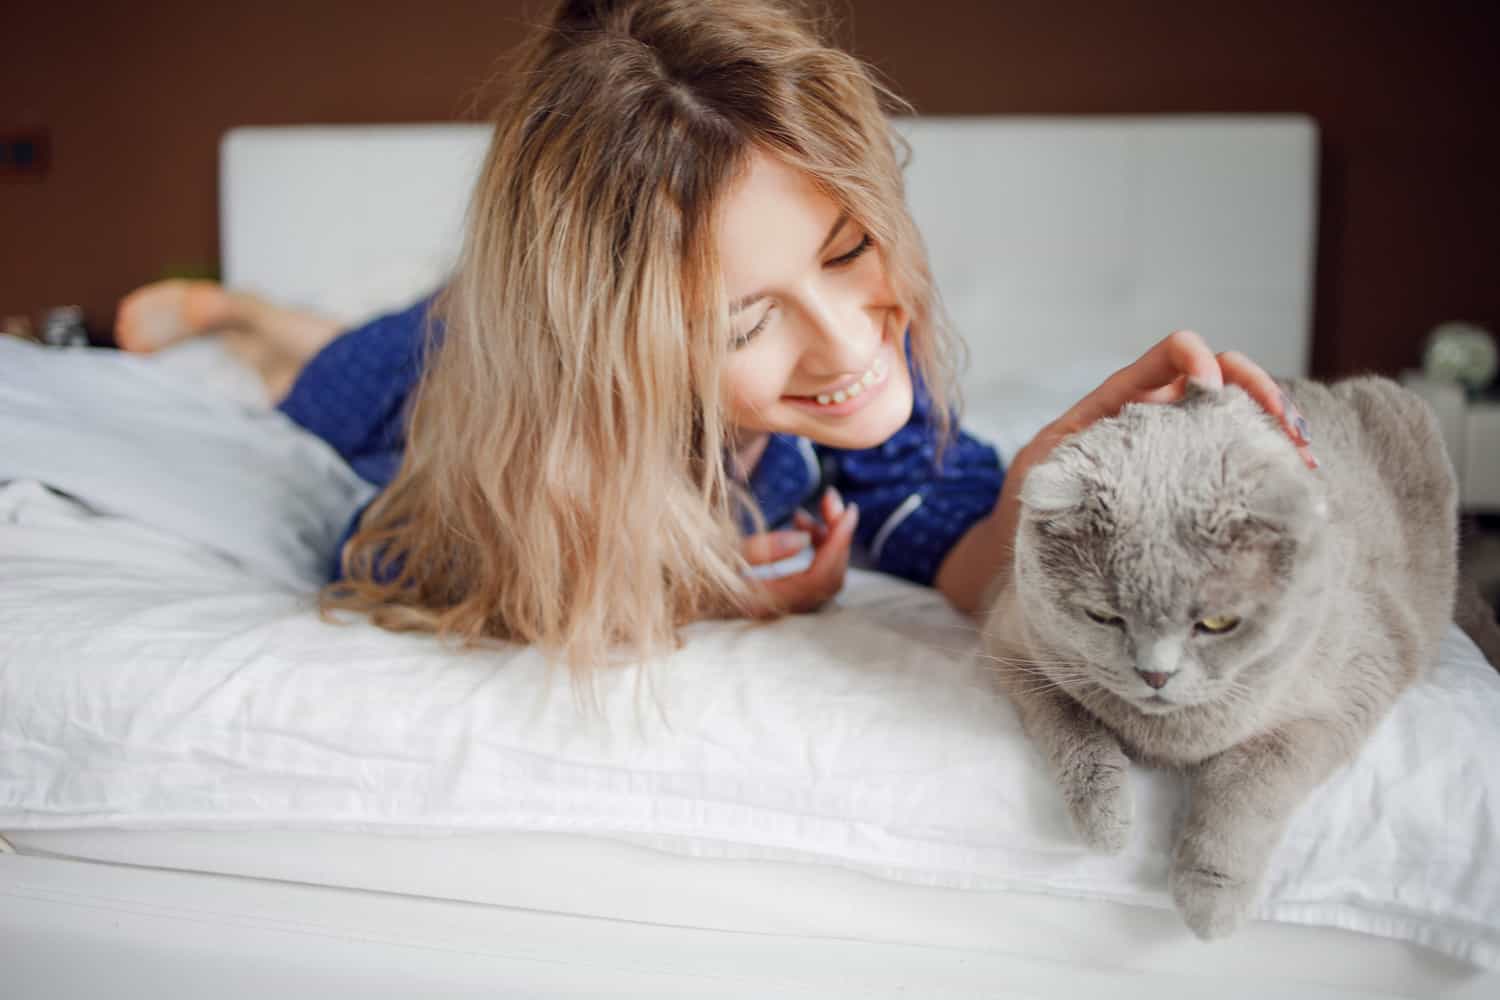 A woman lying on a bed, smiling and petting a gray cat